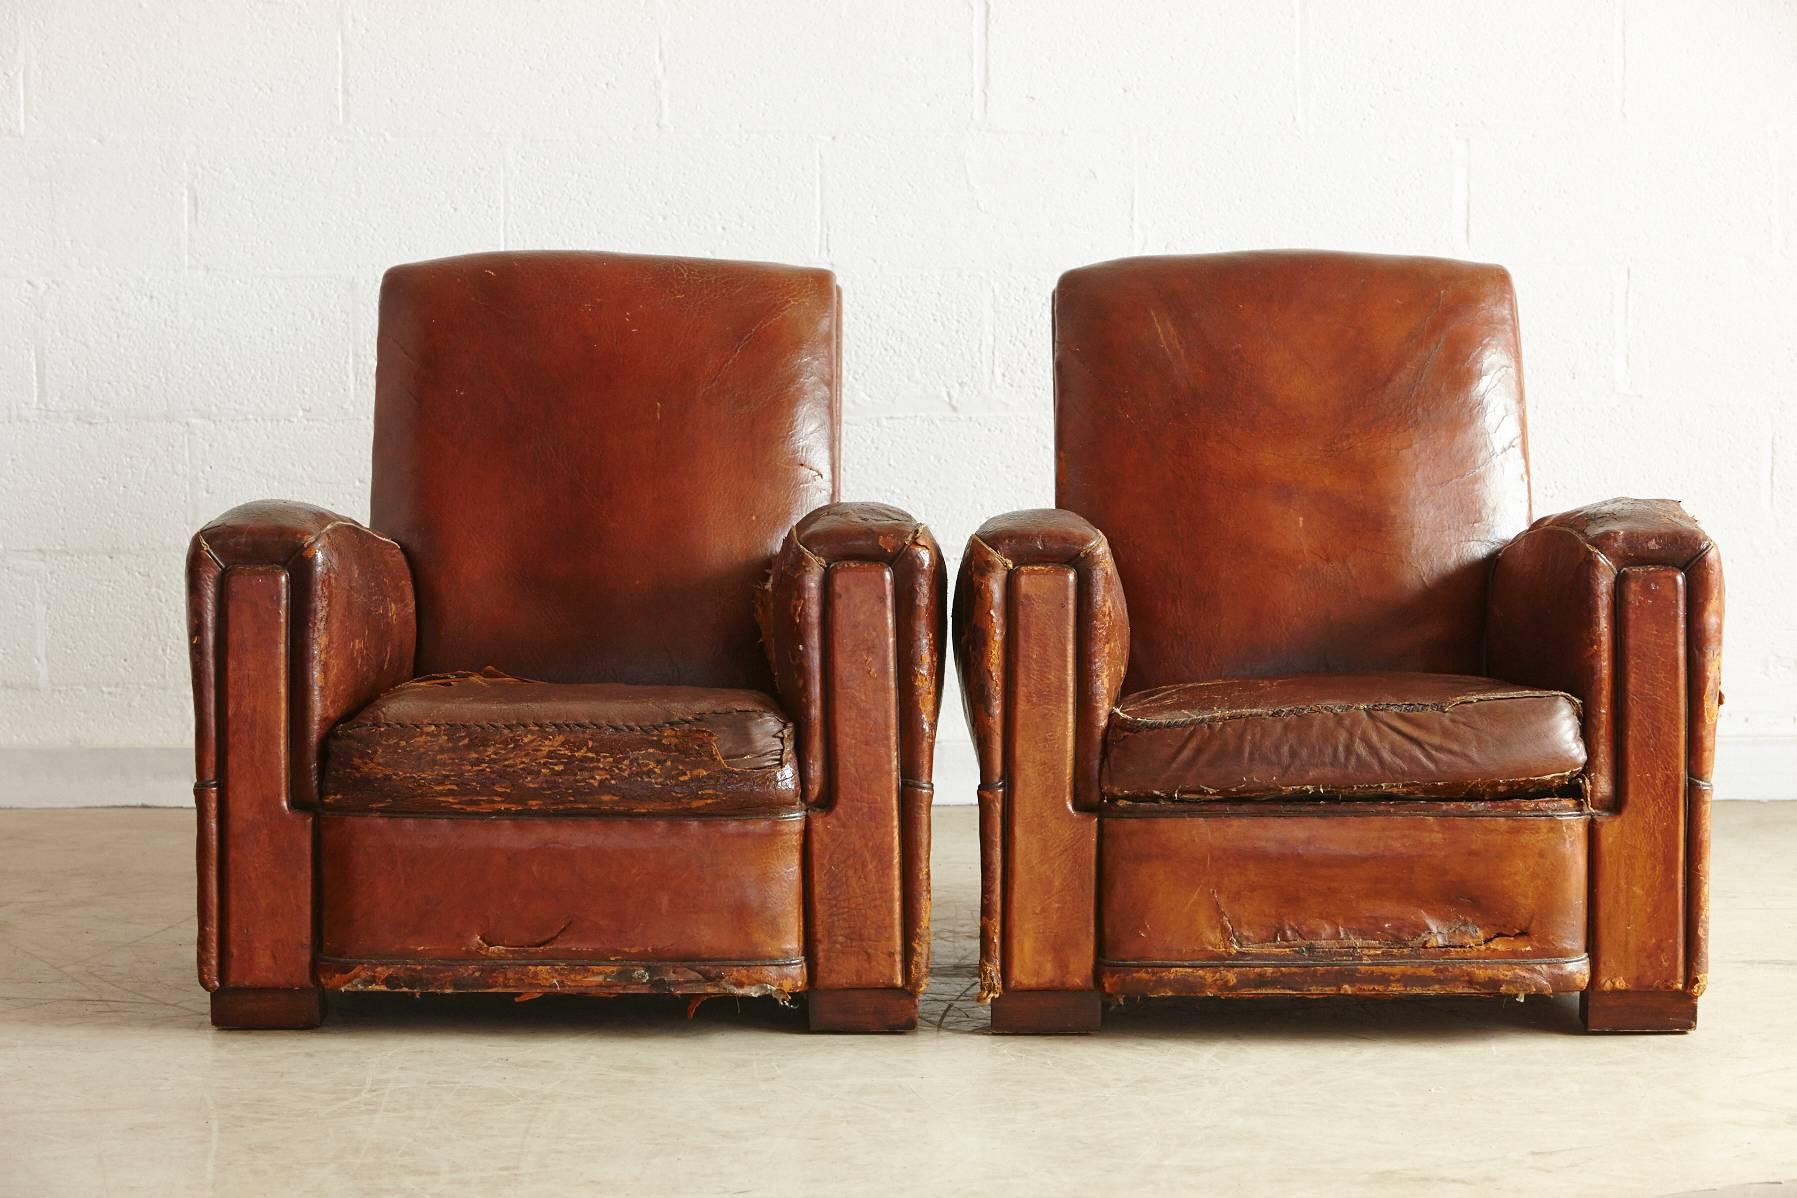 Beautifully distressed and very comfortable pair of French leather fauteuils, in original condition.
Tears and rips on both chairs. Please refer to the Detailed photos, as they are part of the description. 
Very charming Wabi Sabi style.